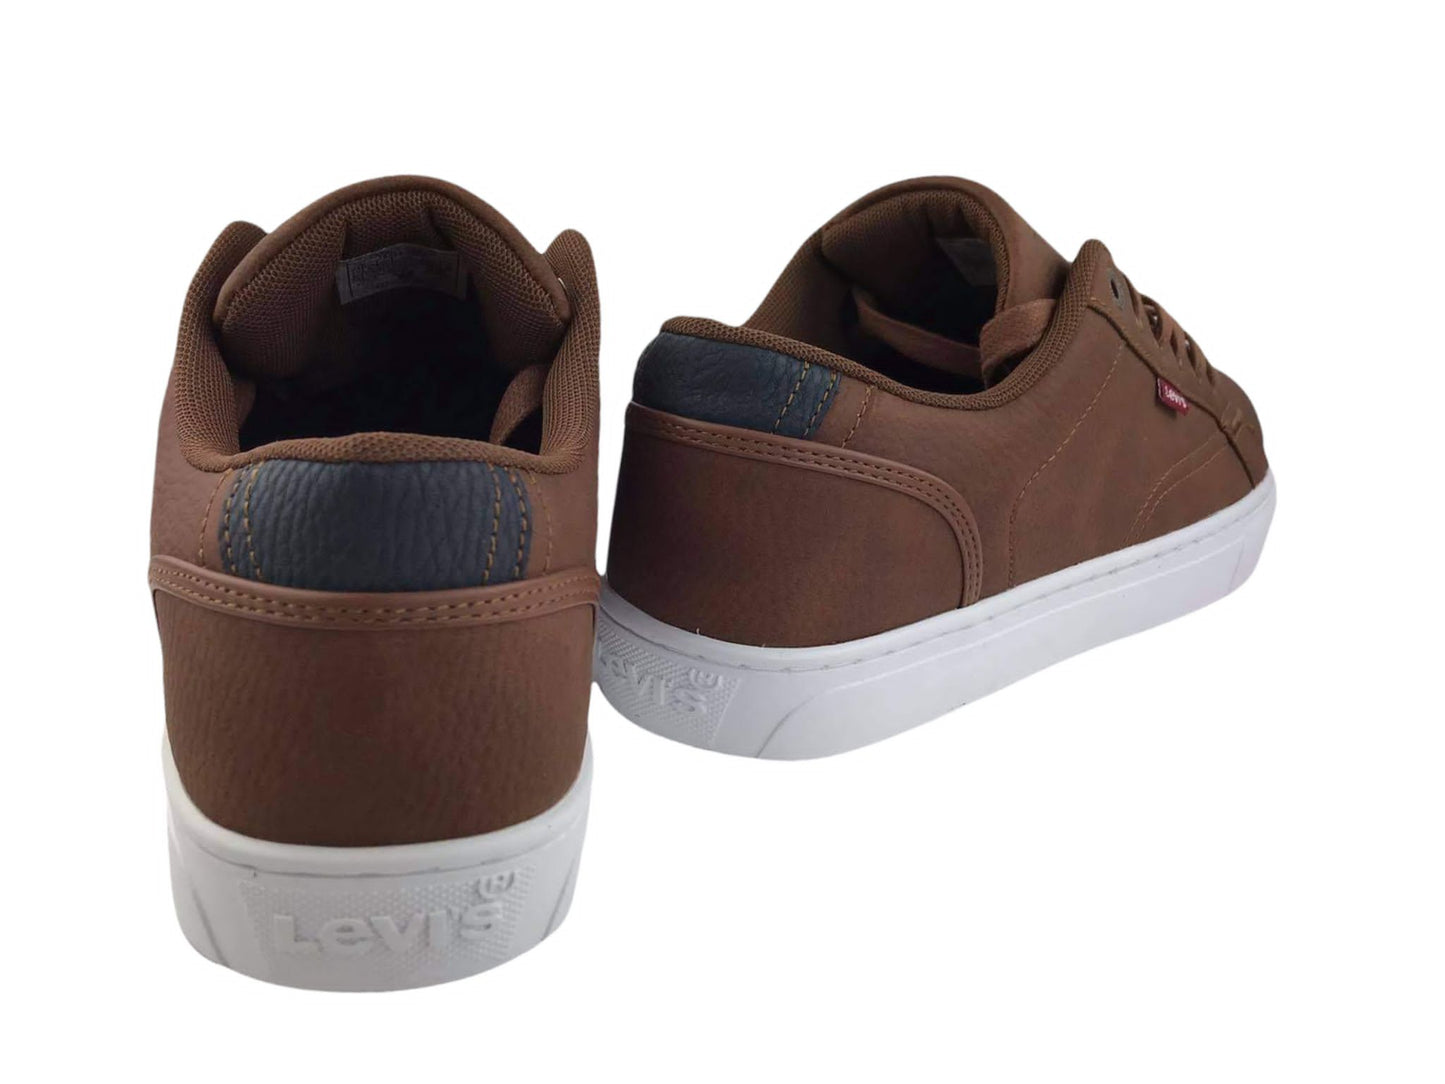 Levi's | Men's street sneakers or tennis shoes with brown Courtright eco-leather laces